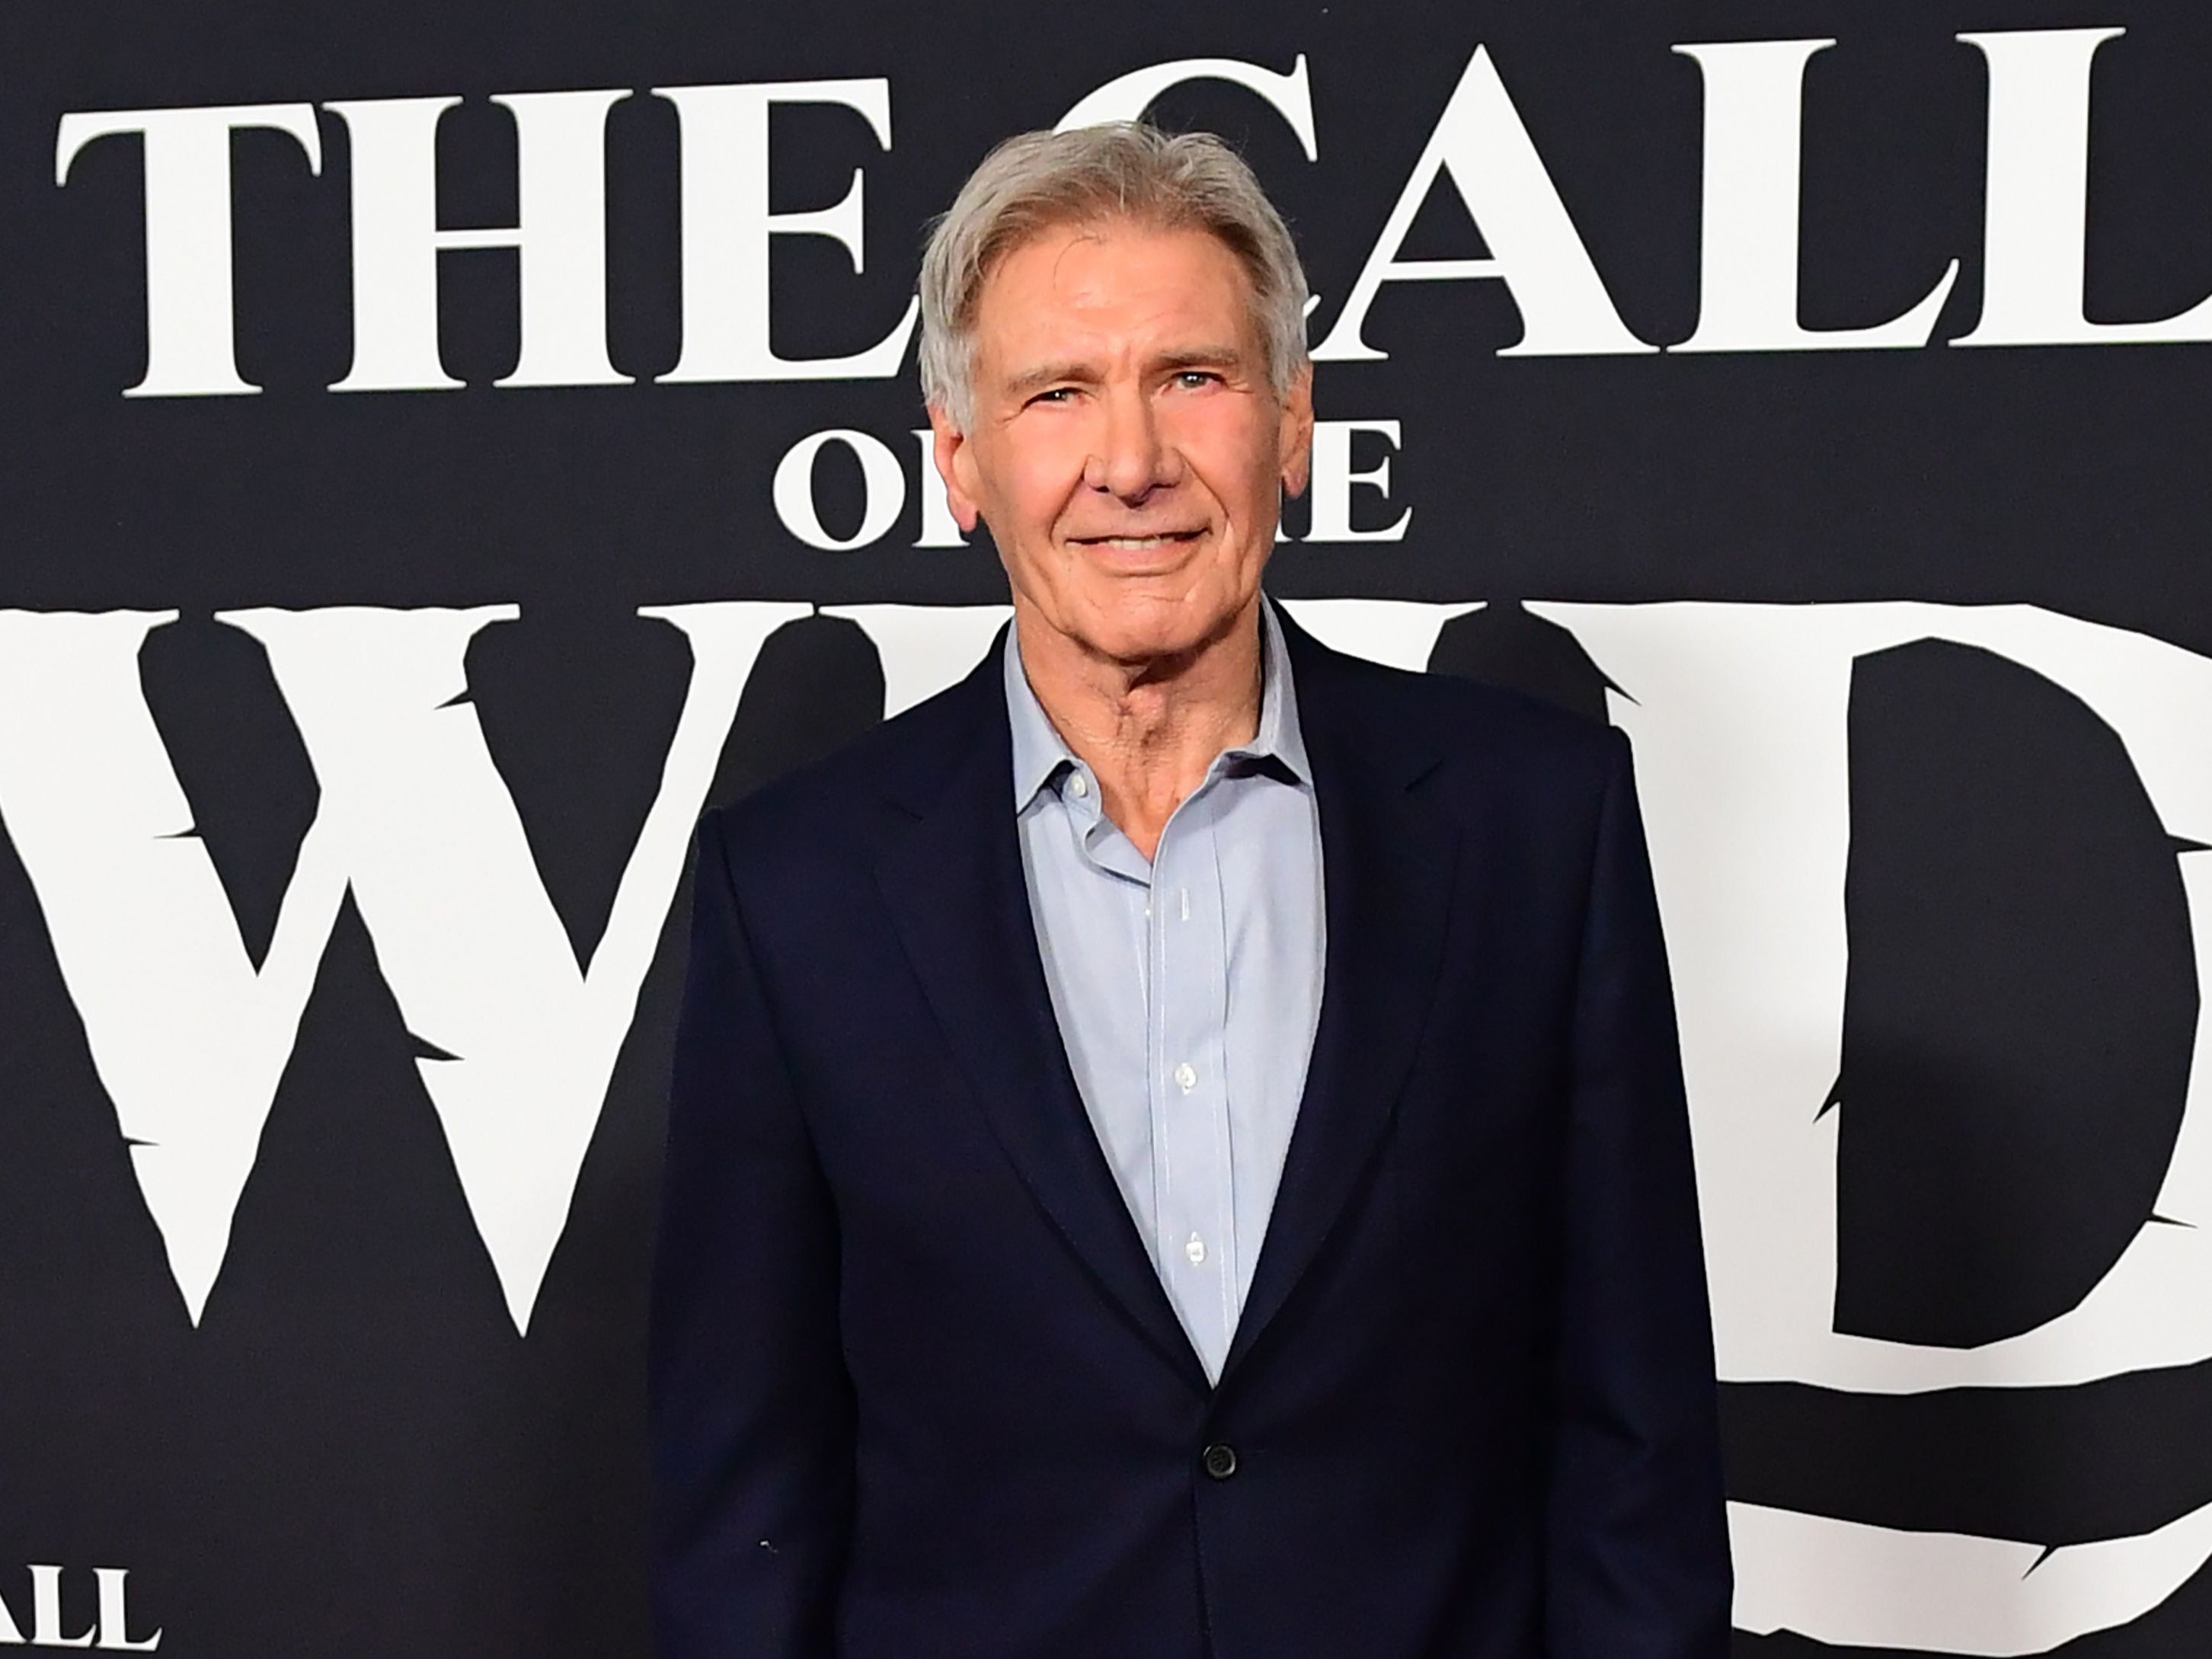 Harrison Ford is returning as Indiana Jones in a 2023 film